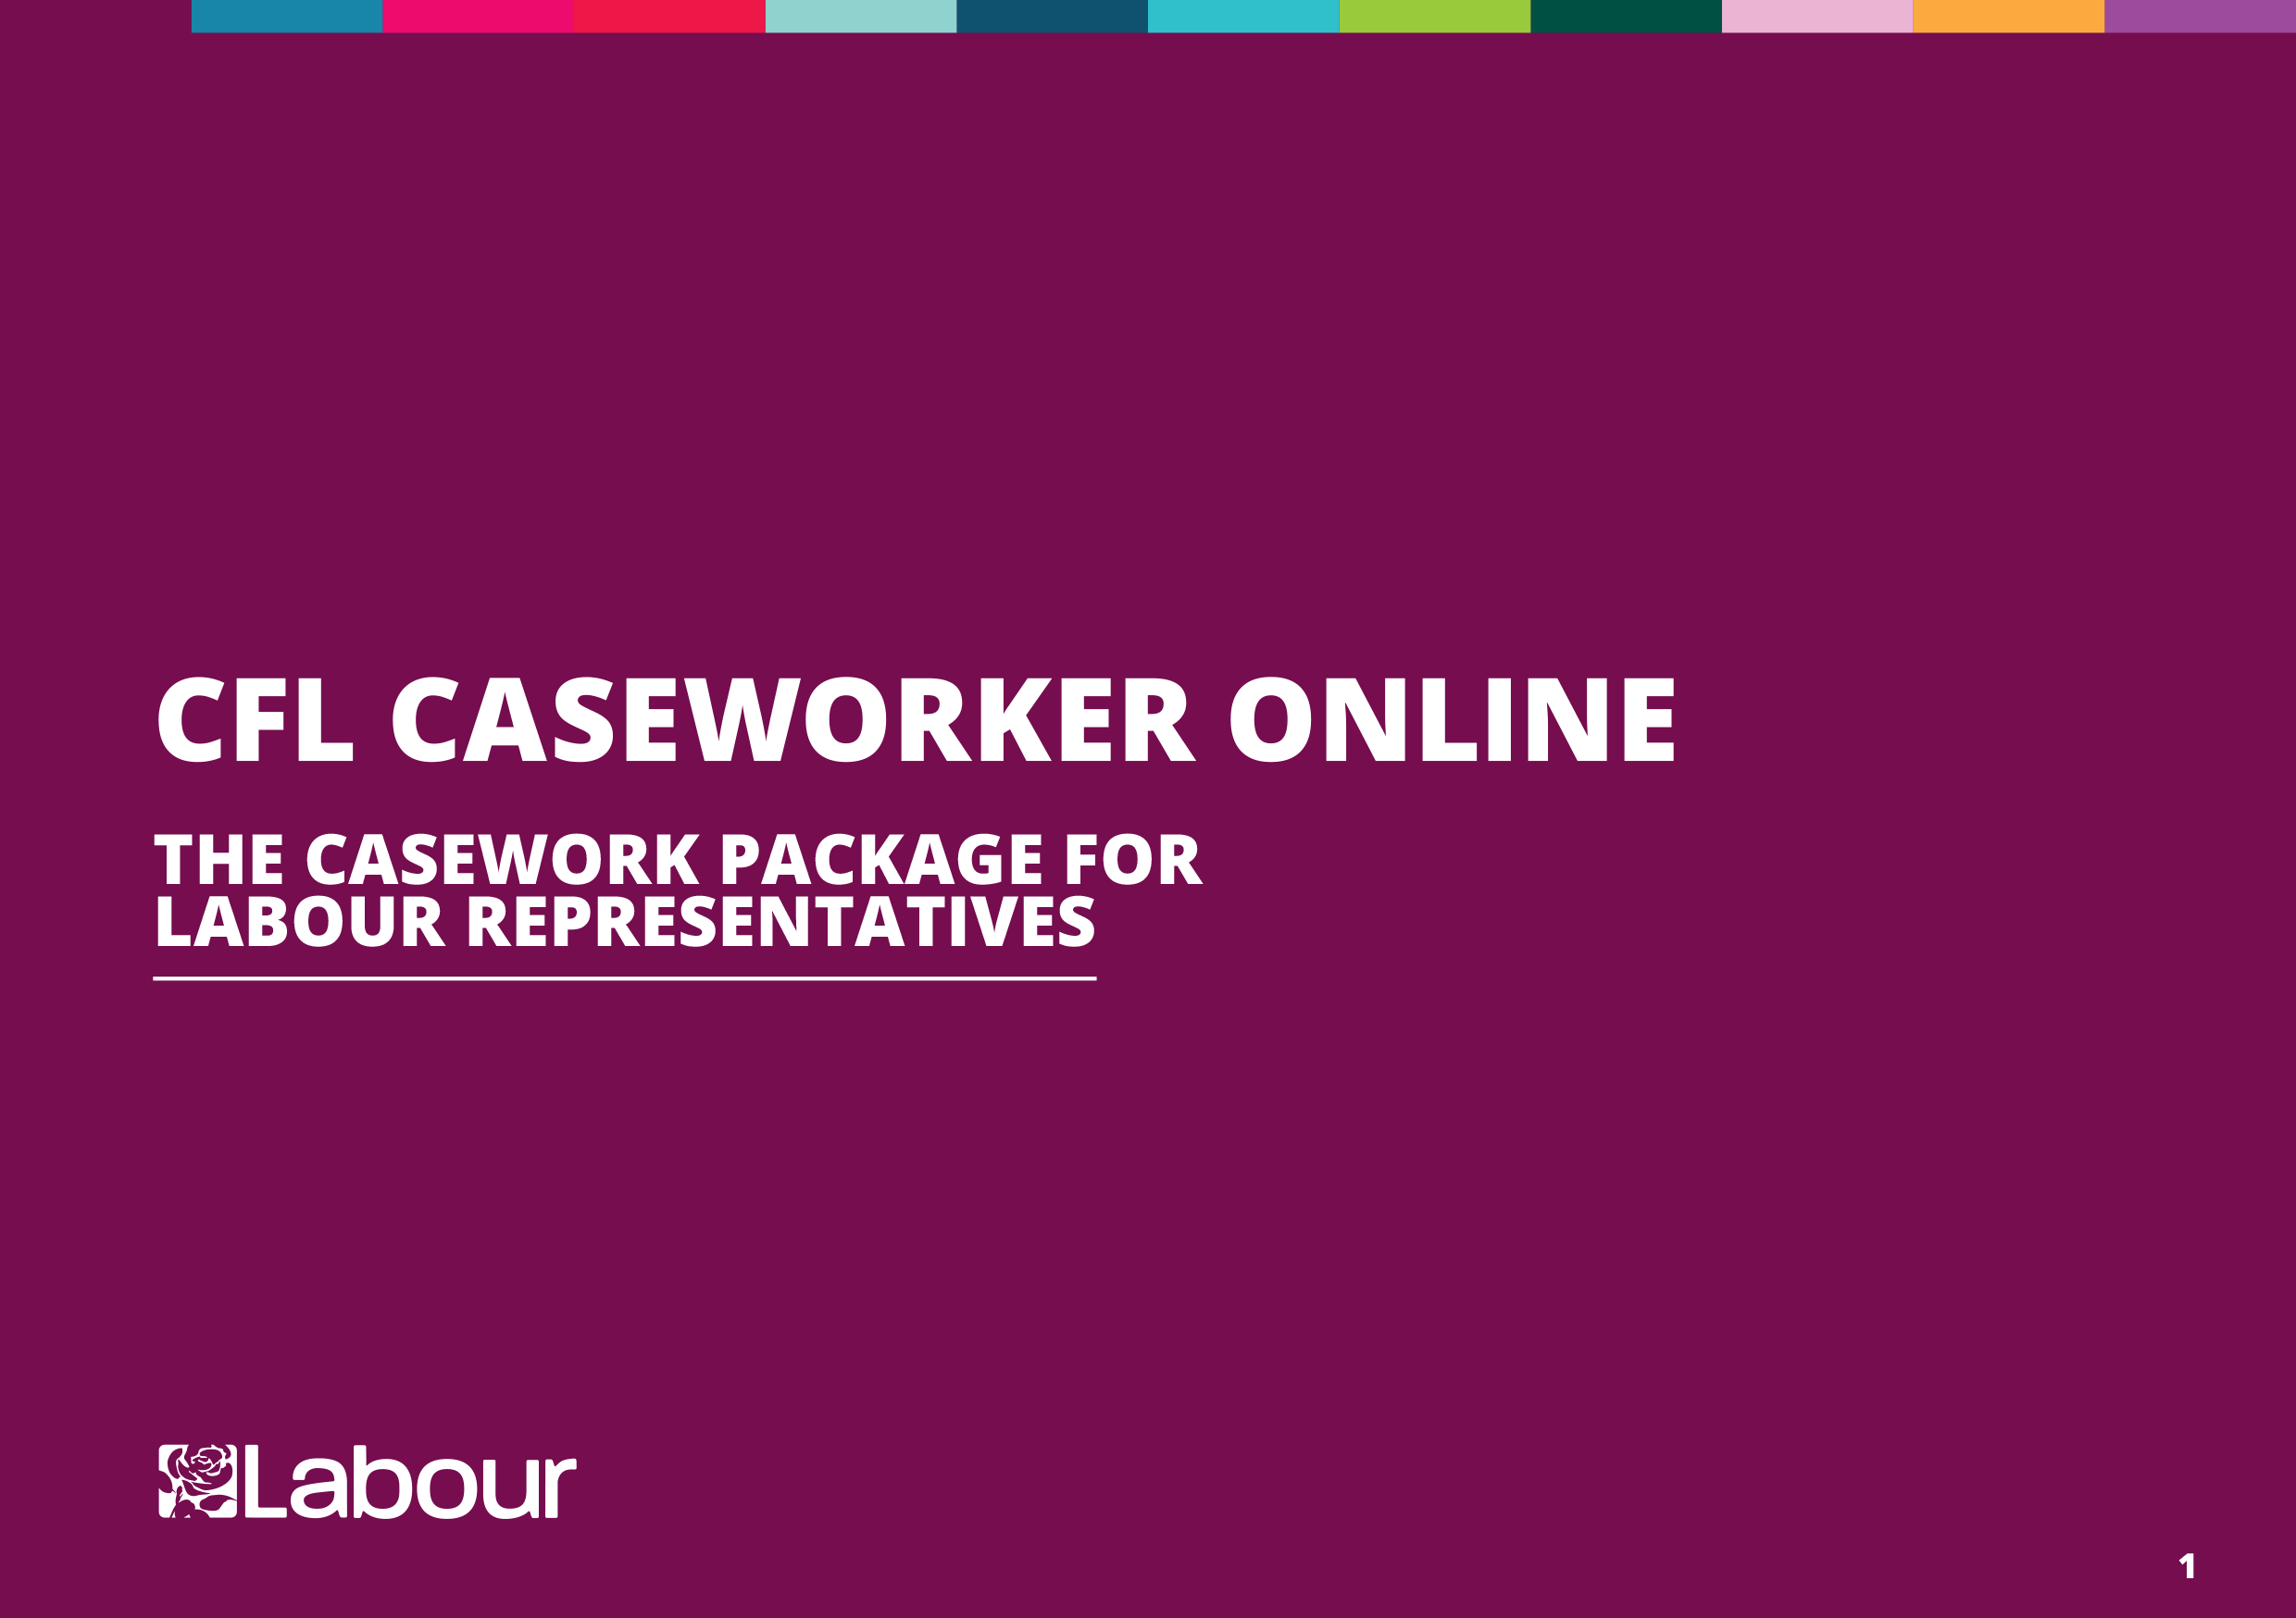 Computing for Labour Caseworker Online-1